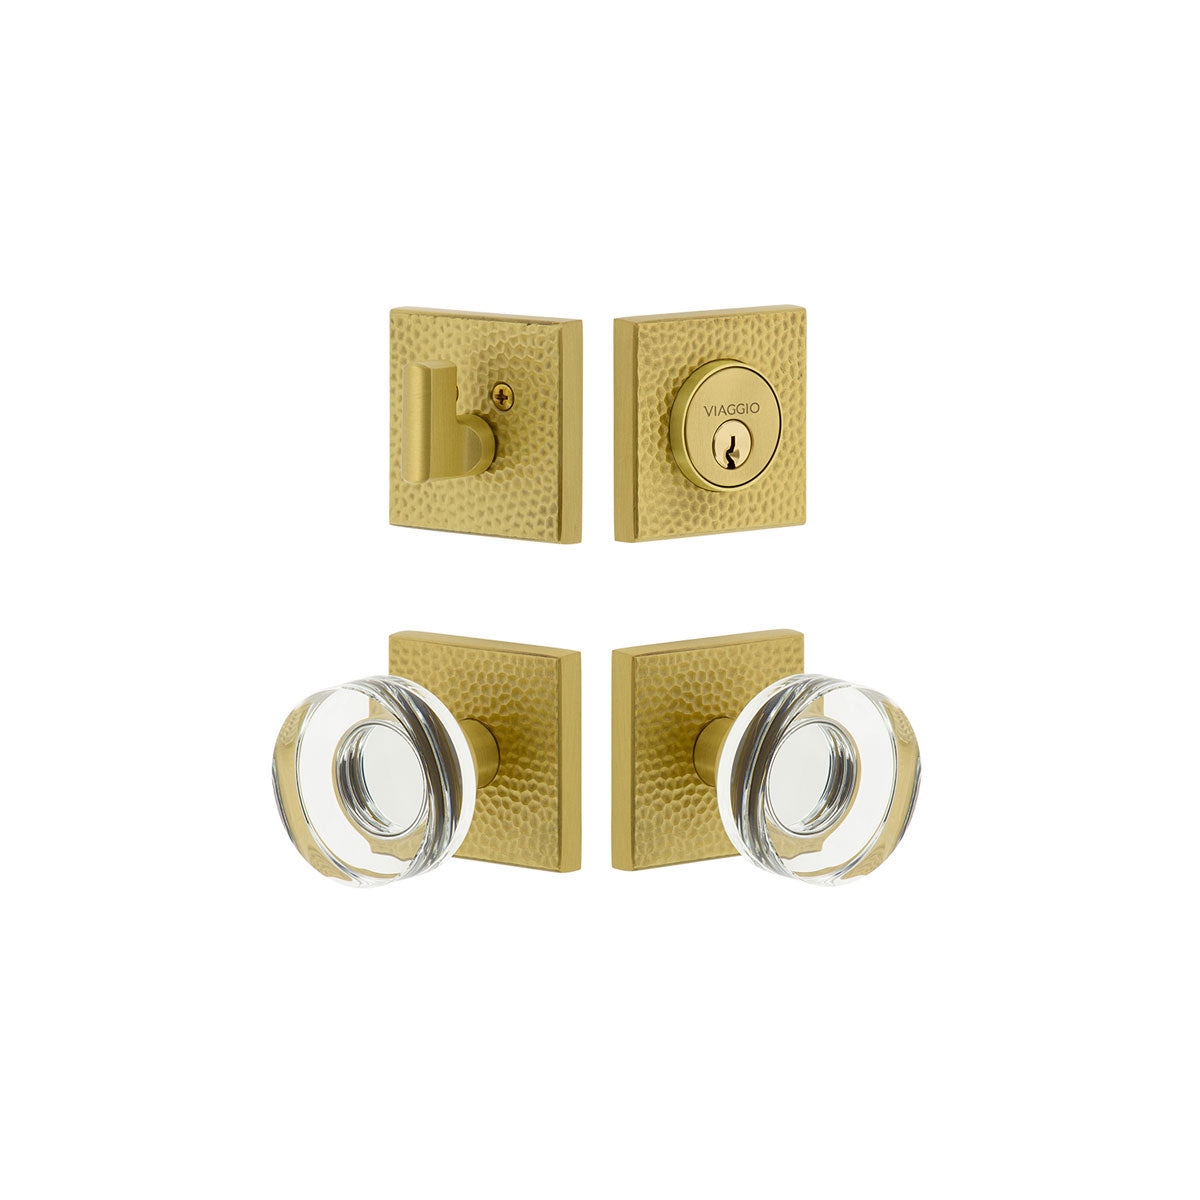 Quadrato Hammered Rosette Entry Set with Circolo Crystal Knob in Satin Brass